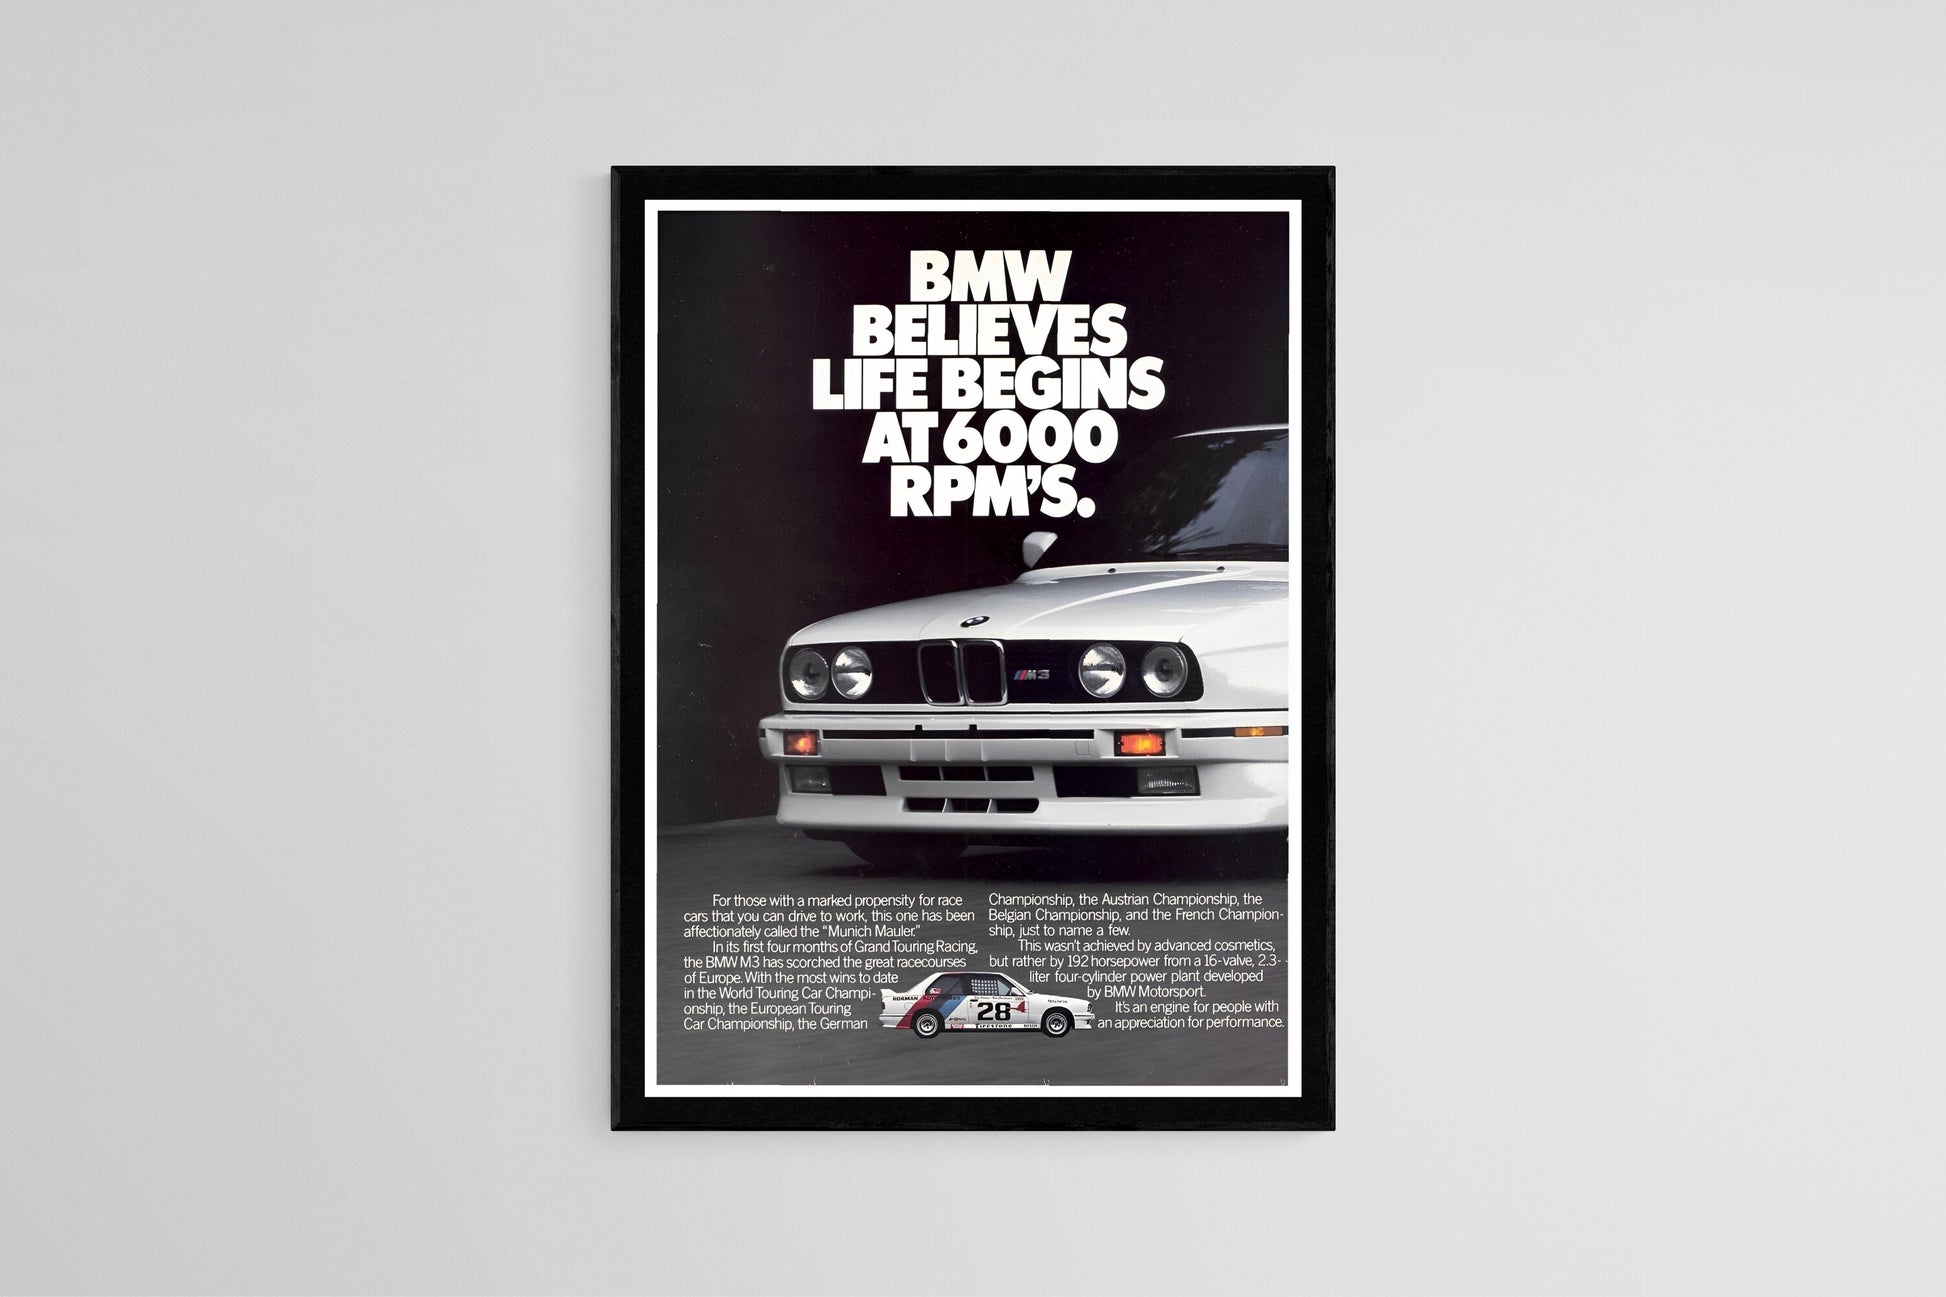 BMW E30 M3 BMW believes life begins at 6000 RPM´s poster Framed